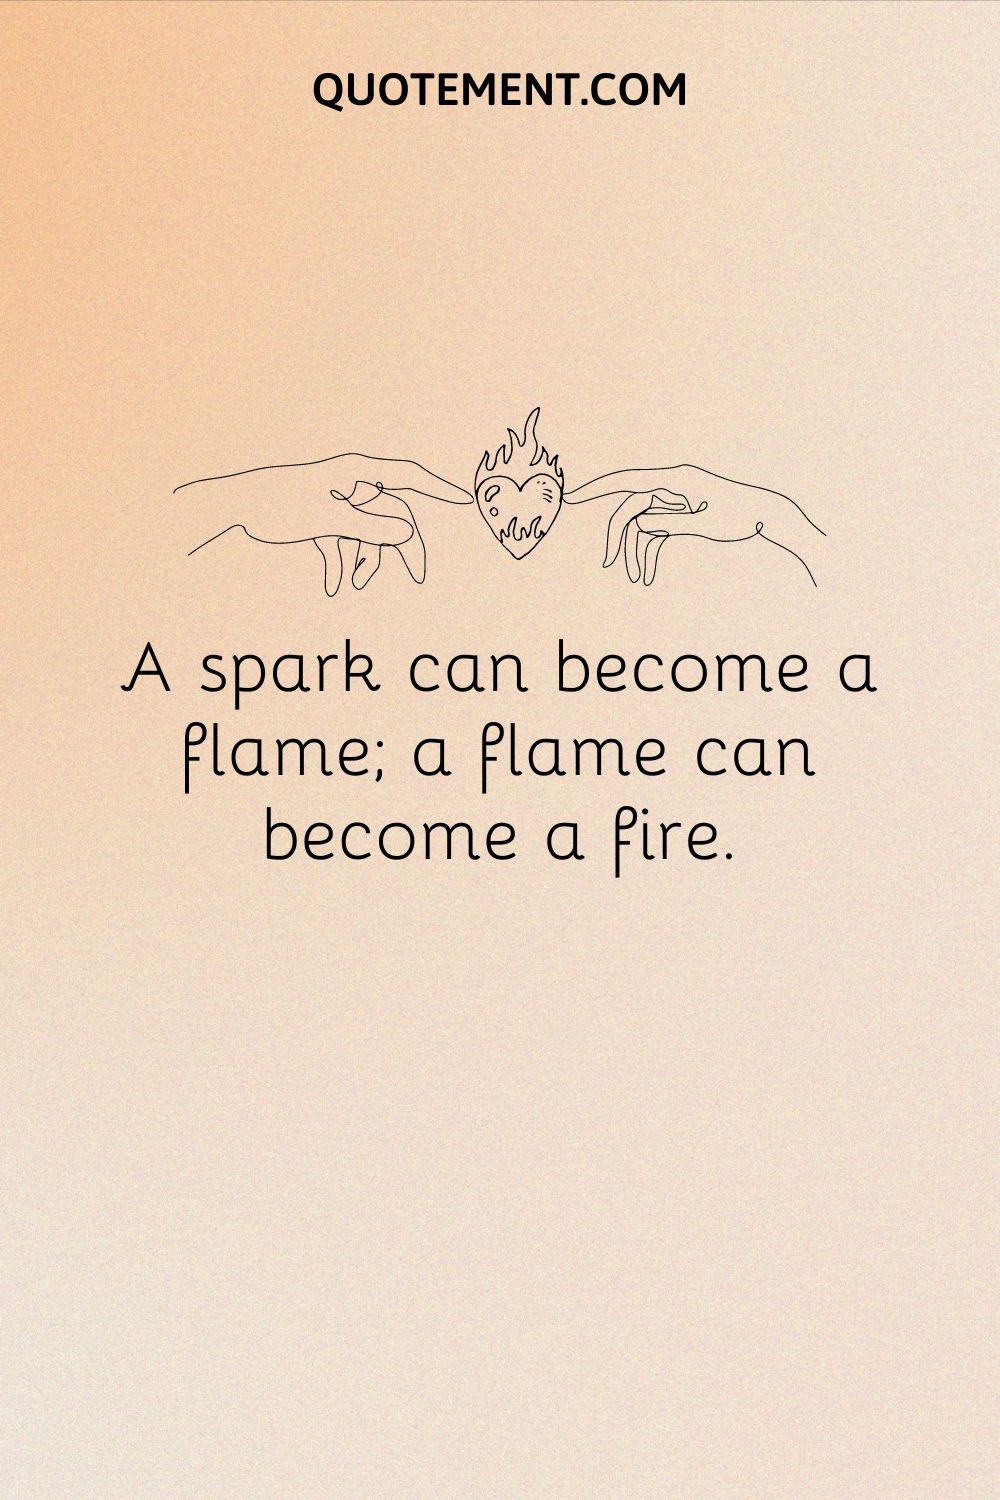  A spark can become a flame; a flame can become a fire